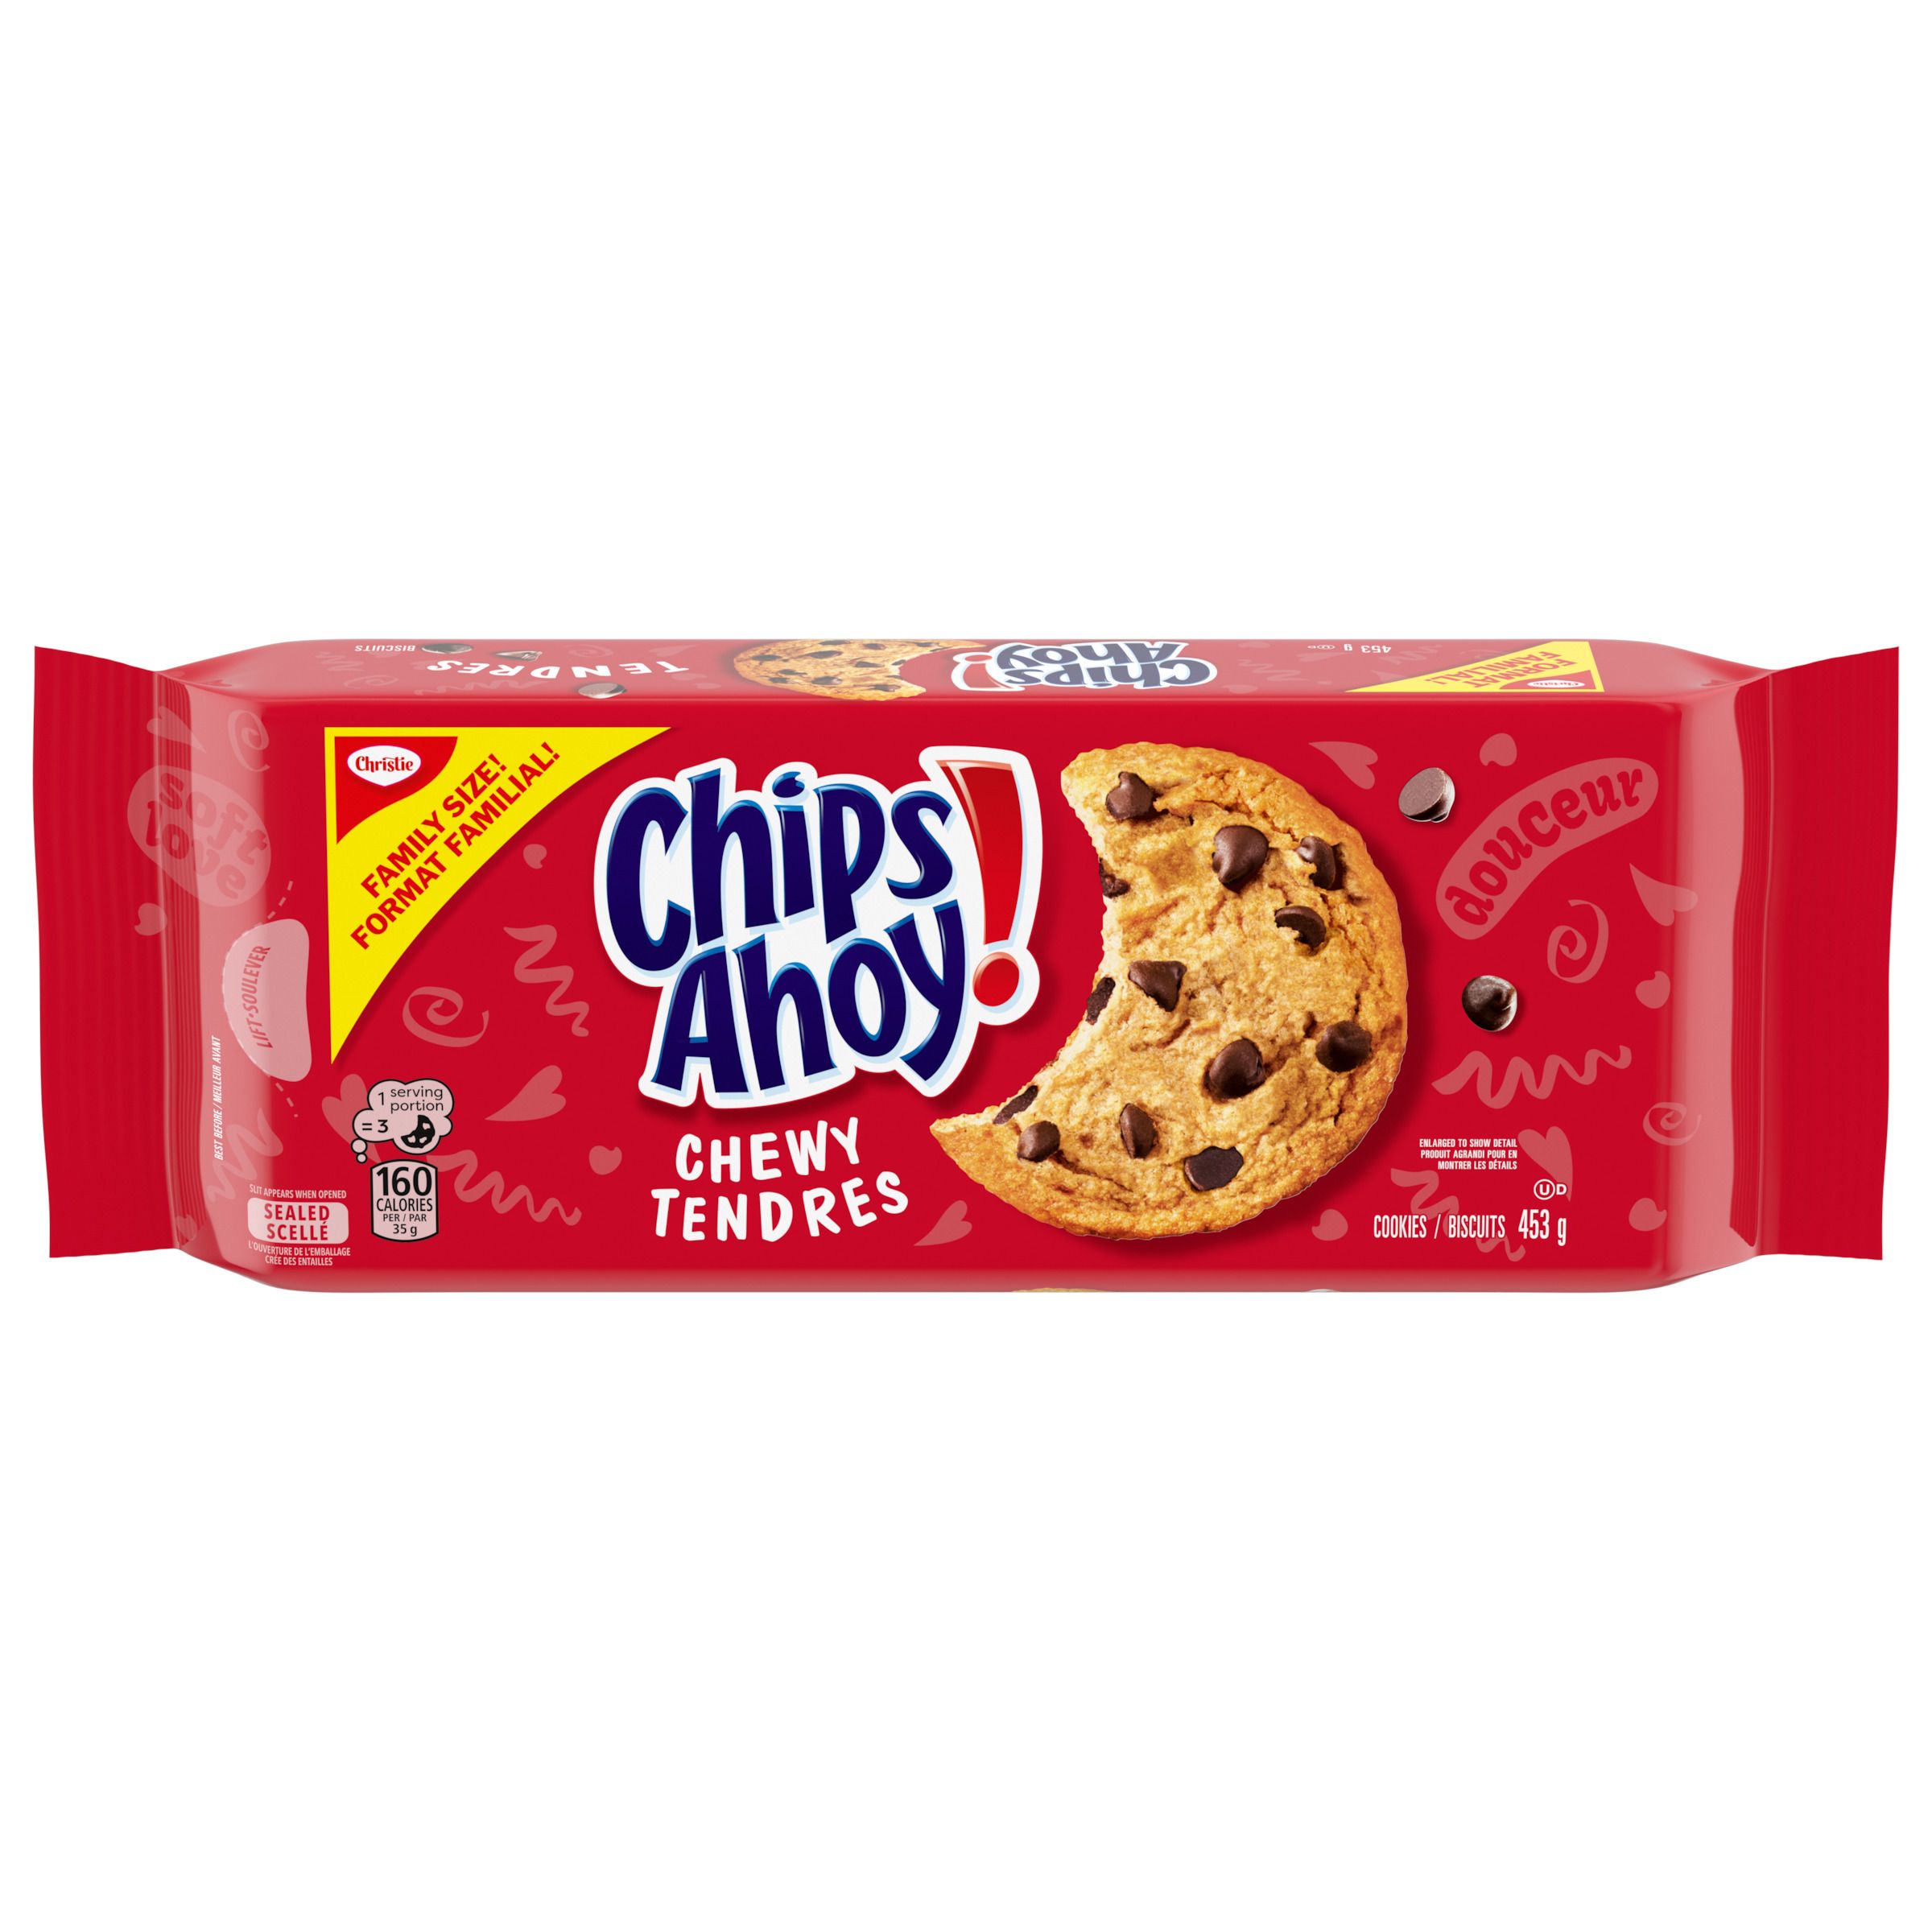 Biscuits CHIPS AHOY! Tendres, 1 emballage refermable, format familial de 453 g-1